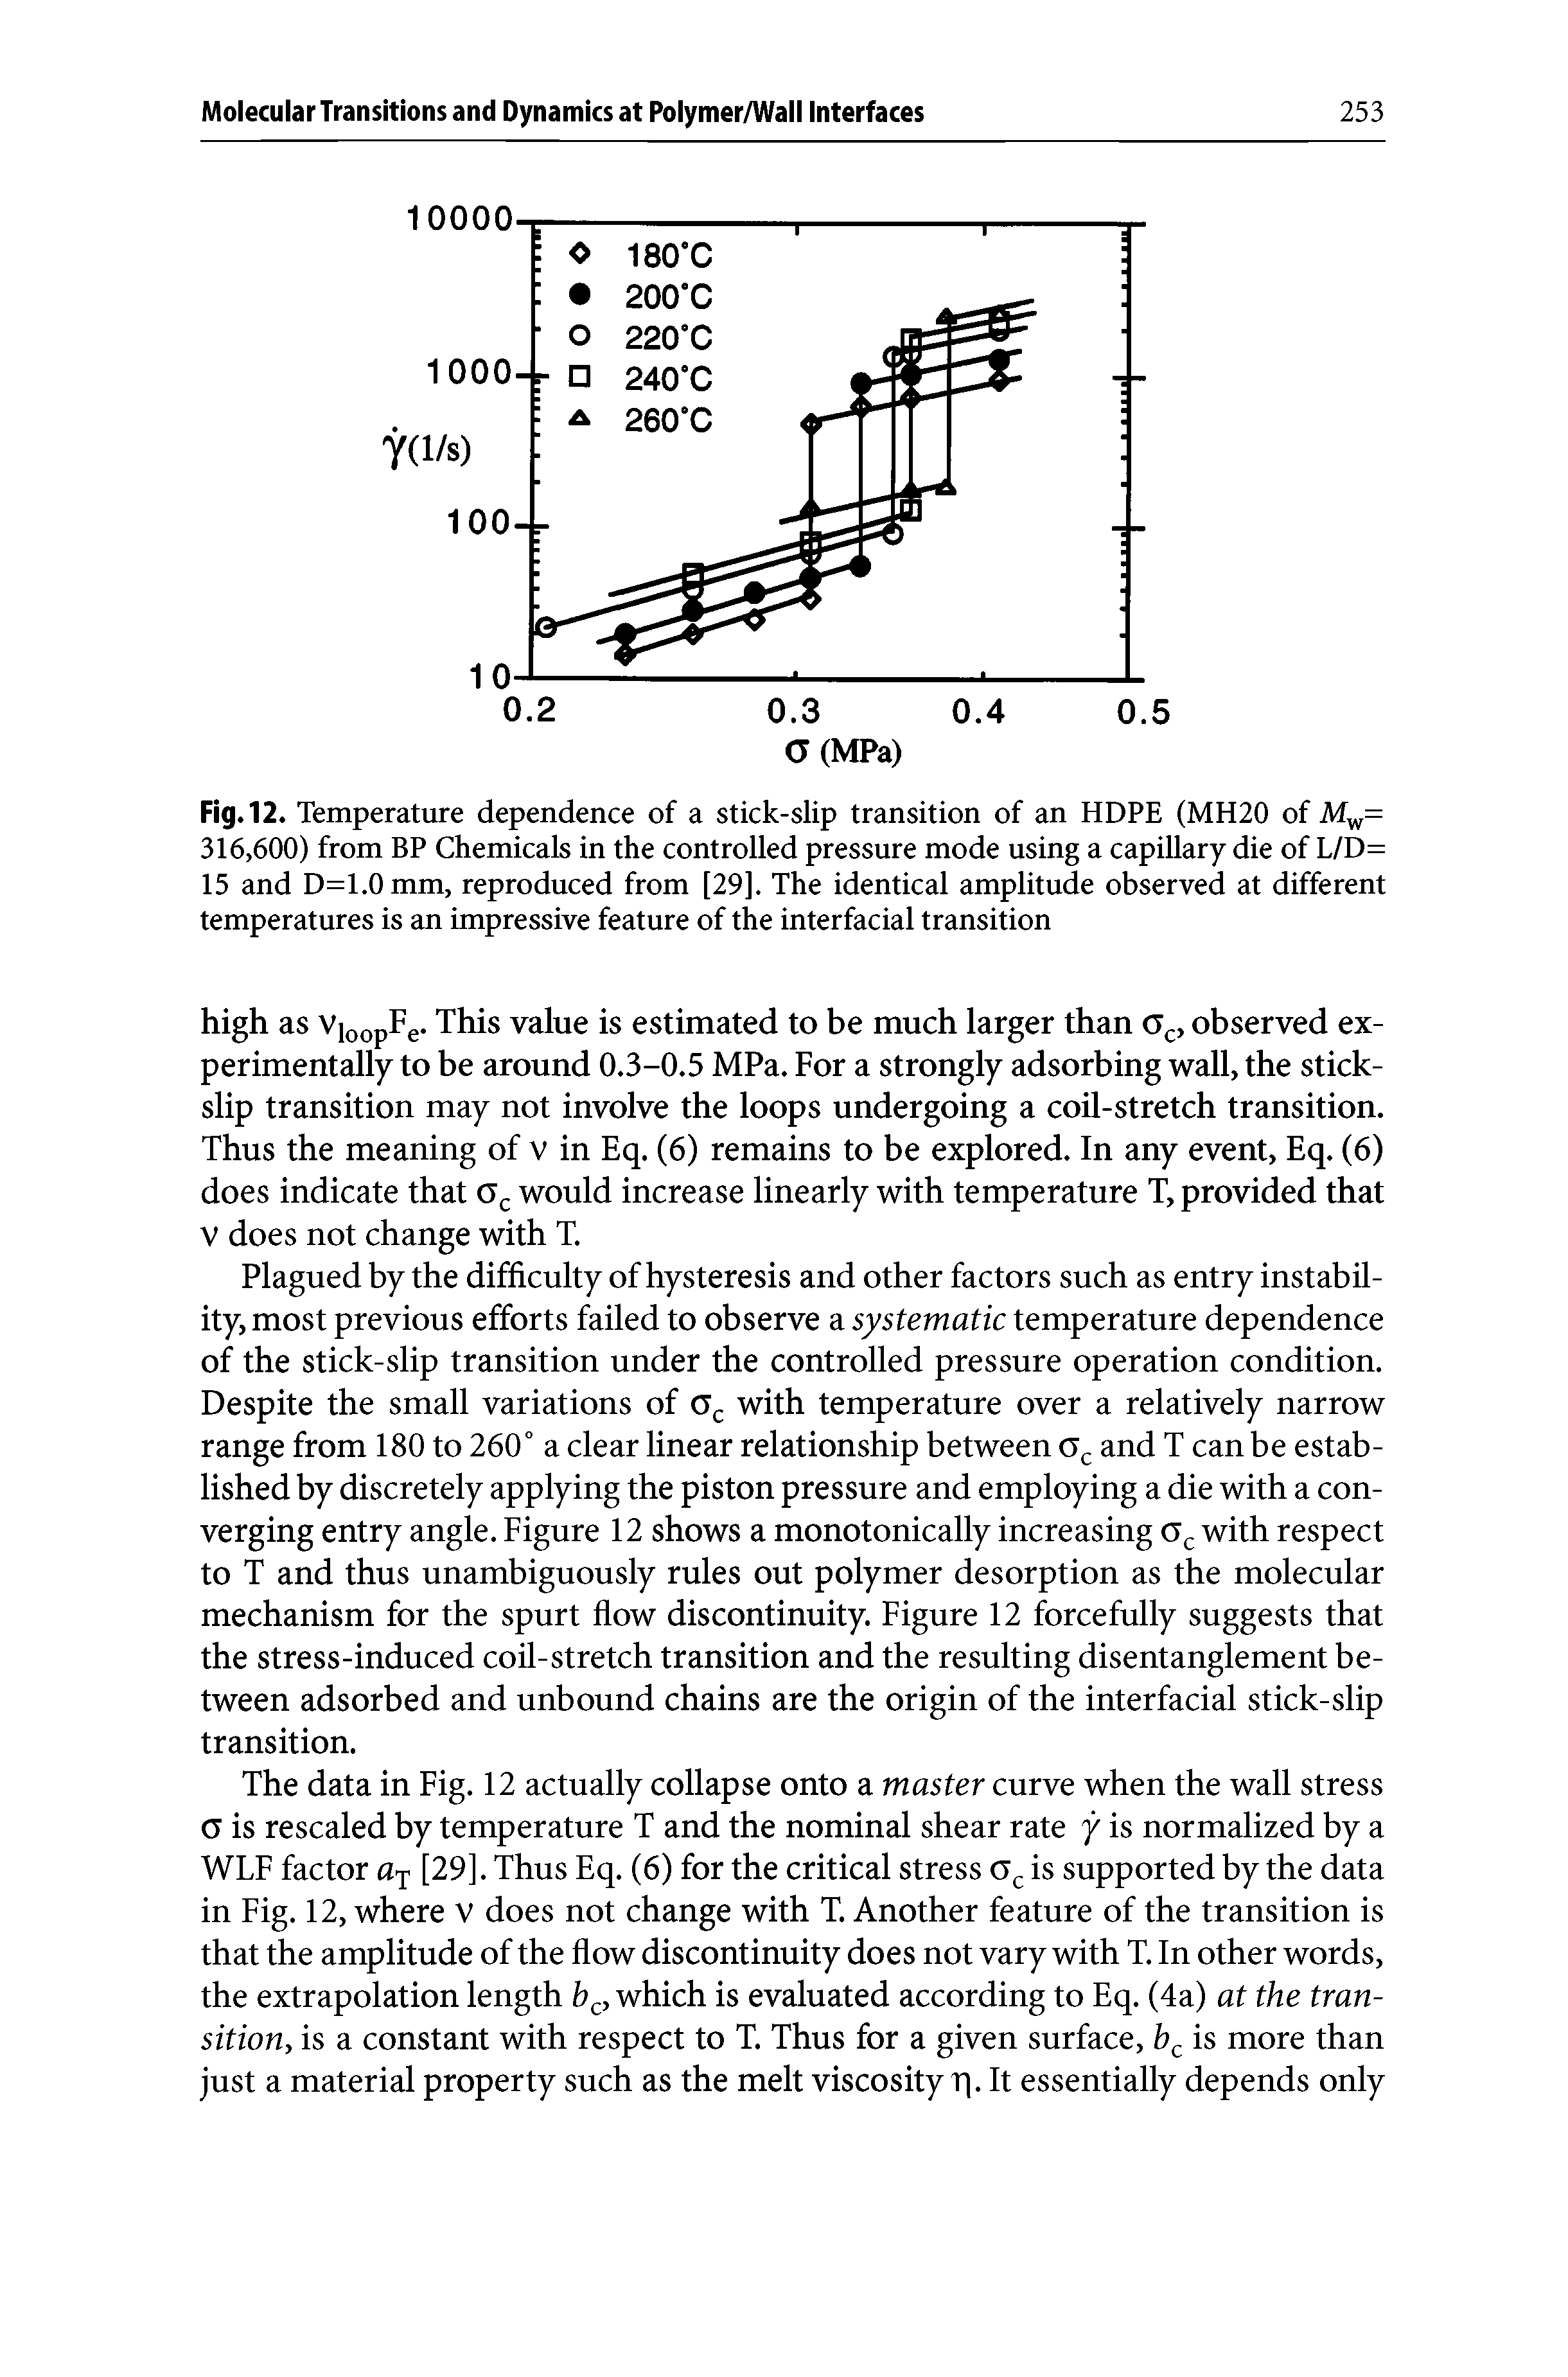 Fig. 12. Temperature dependence of a stick-slip transition of an HDPE (MH20 of Mw= 316,600) from BP Chemicals in the controlled pressure mode using a capillary die of L/D= 15 and D=1.0mm, reproduced from [29]. The identical amplitude observed at different temperatures is an impressive feature of the interfacial transition...